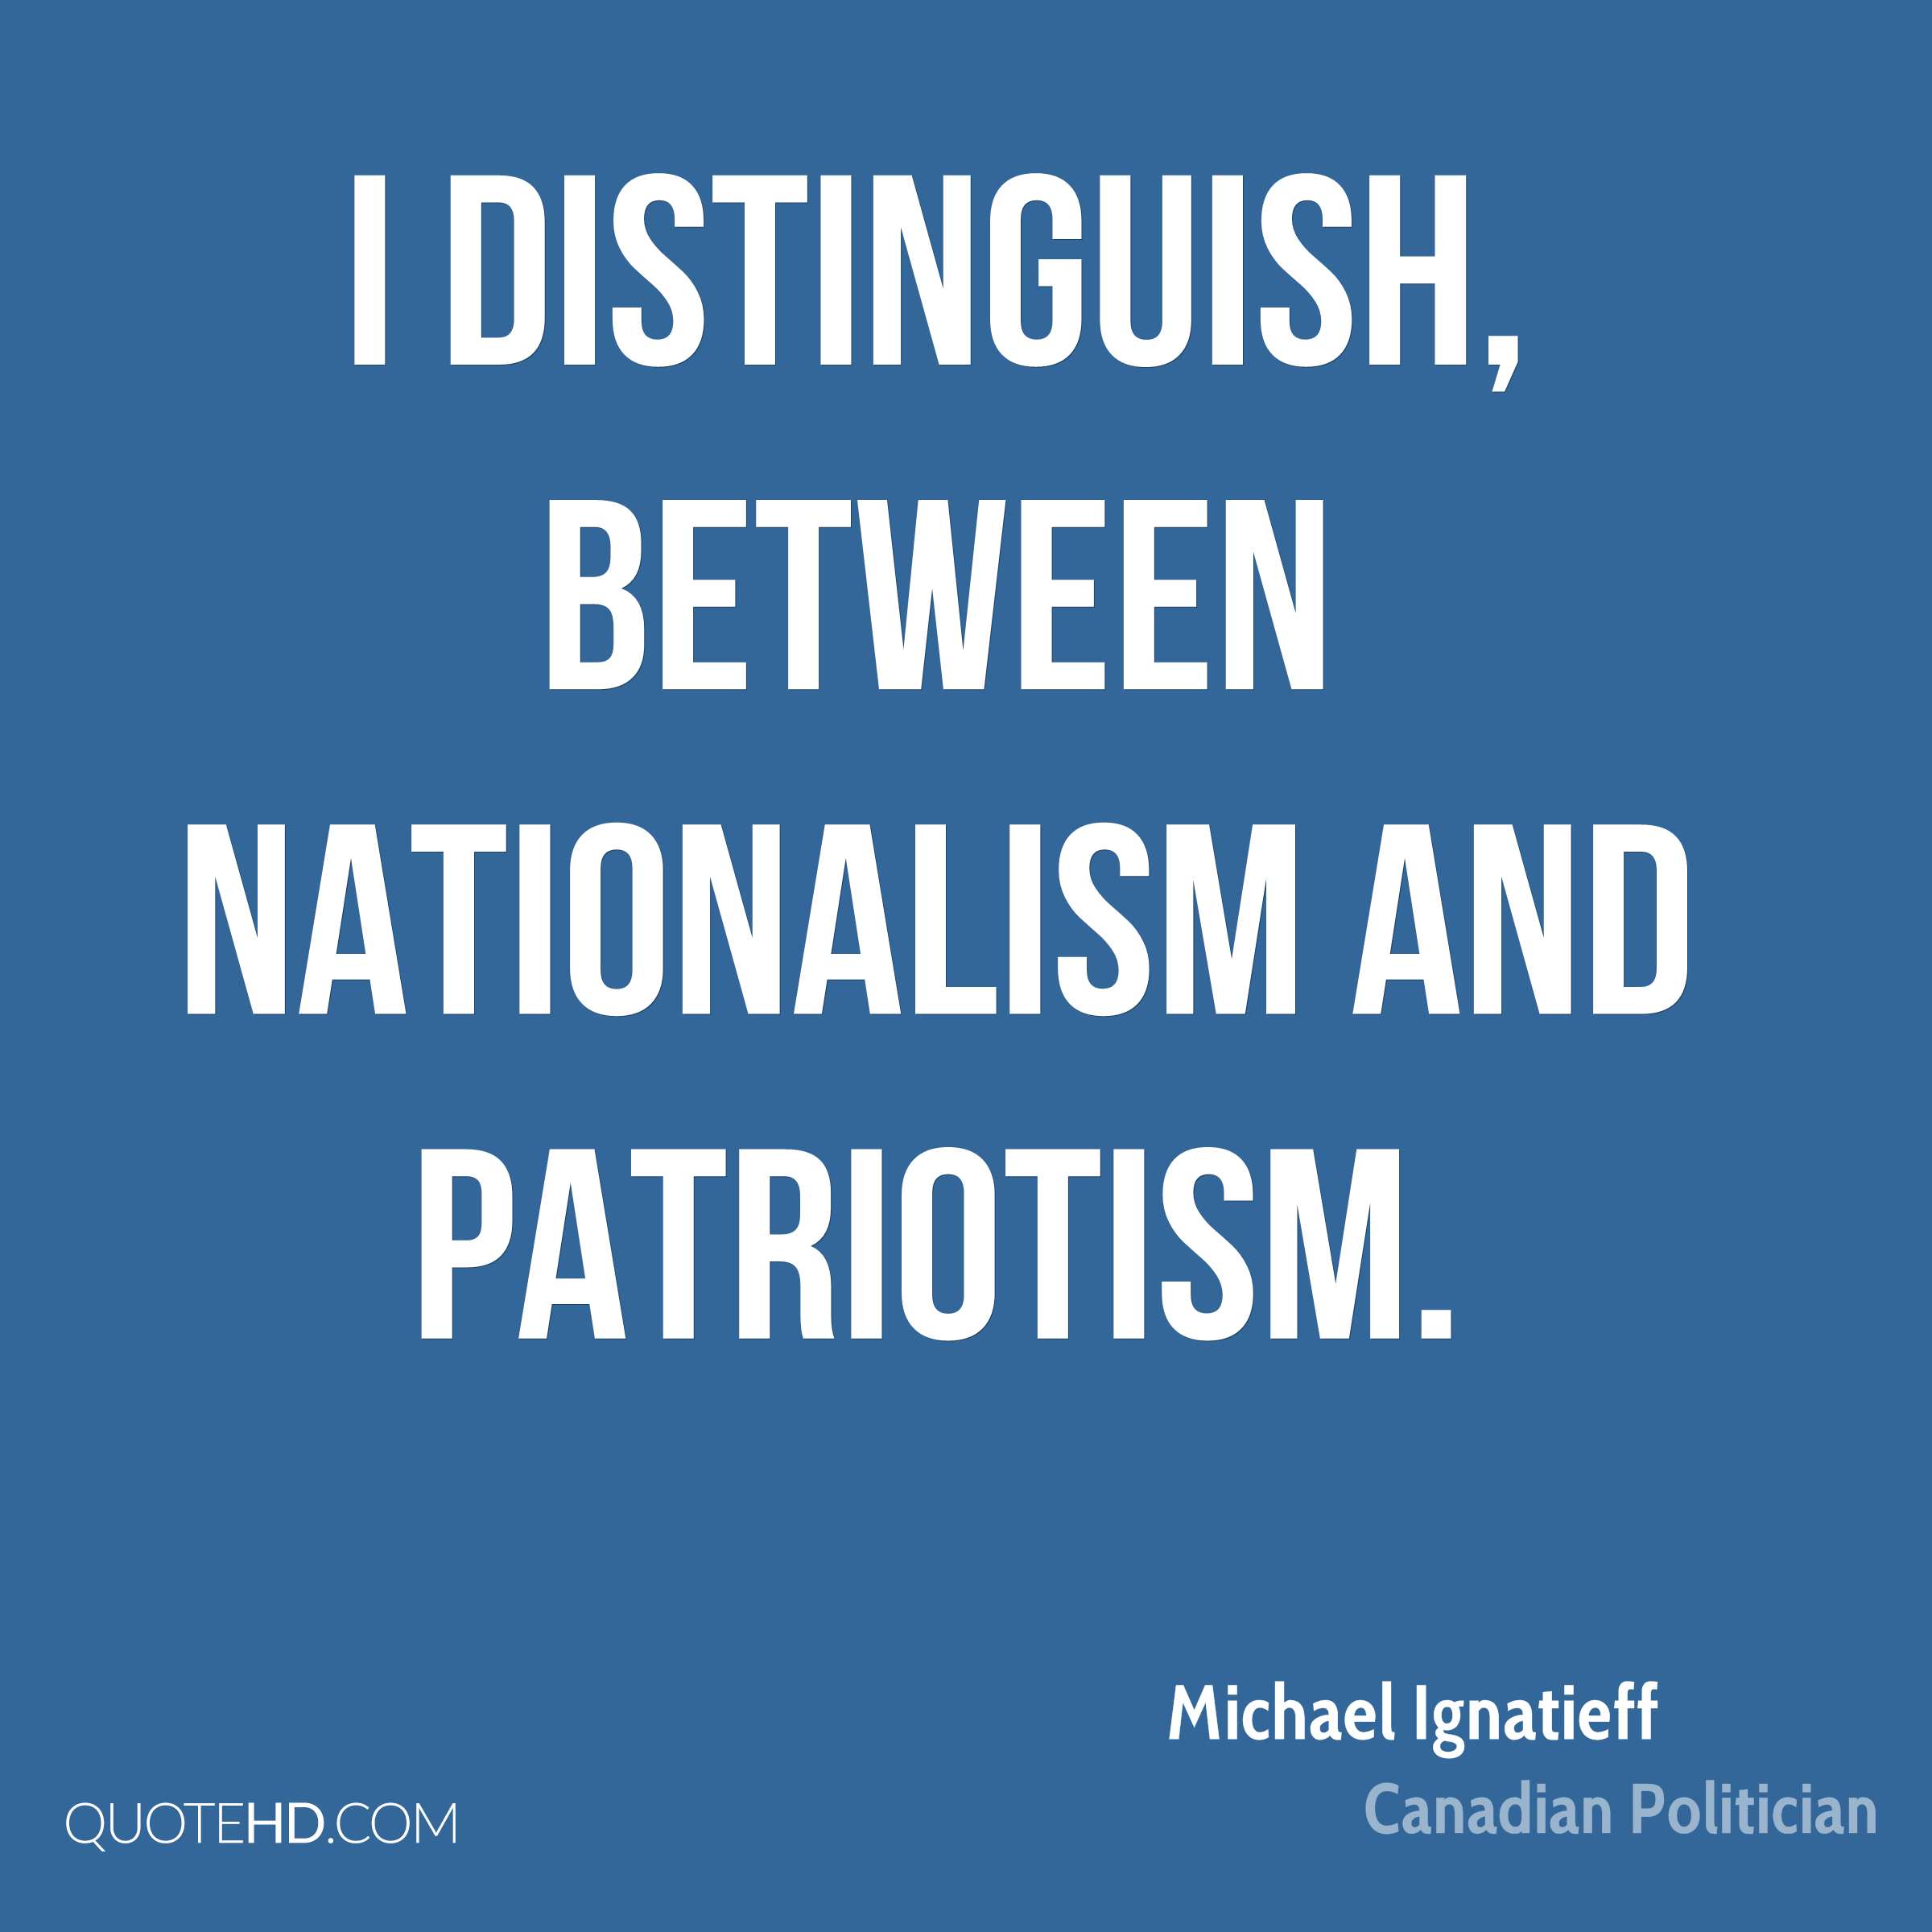 64 Best Patriotism Quotes And Sayings Of All Time